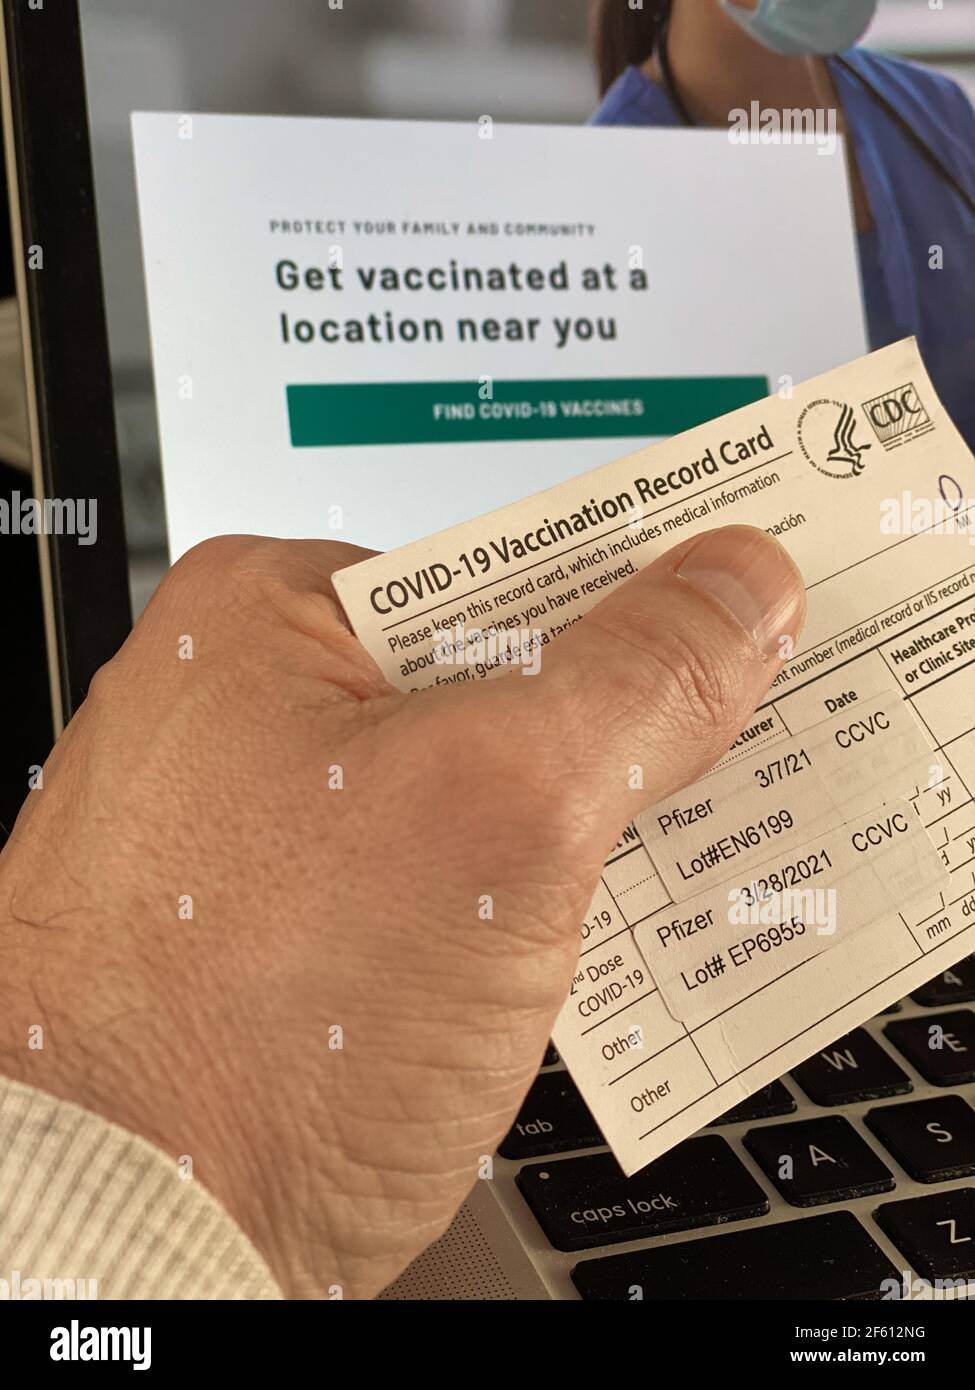 Philadelphia, PA, 29th  Mar. 2021, USA - CDC COVID-29 Vaccination Record Card showing recipient received 2 shots of the Pfizer vaccine Credit: Don Mennig/Alamy Live News Stock Photo